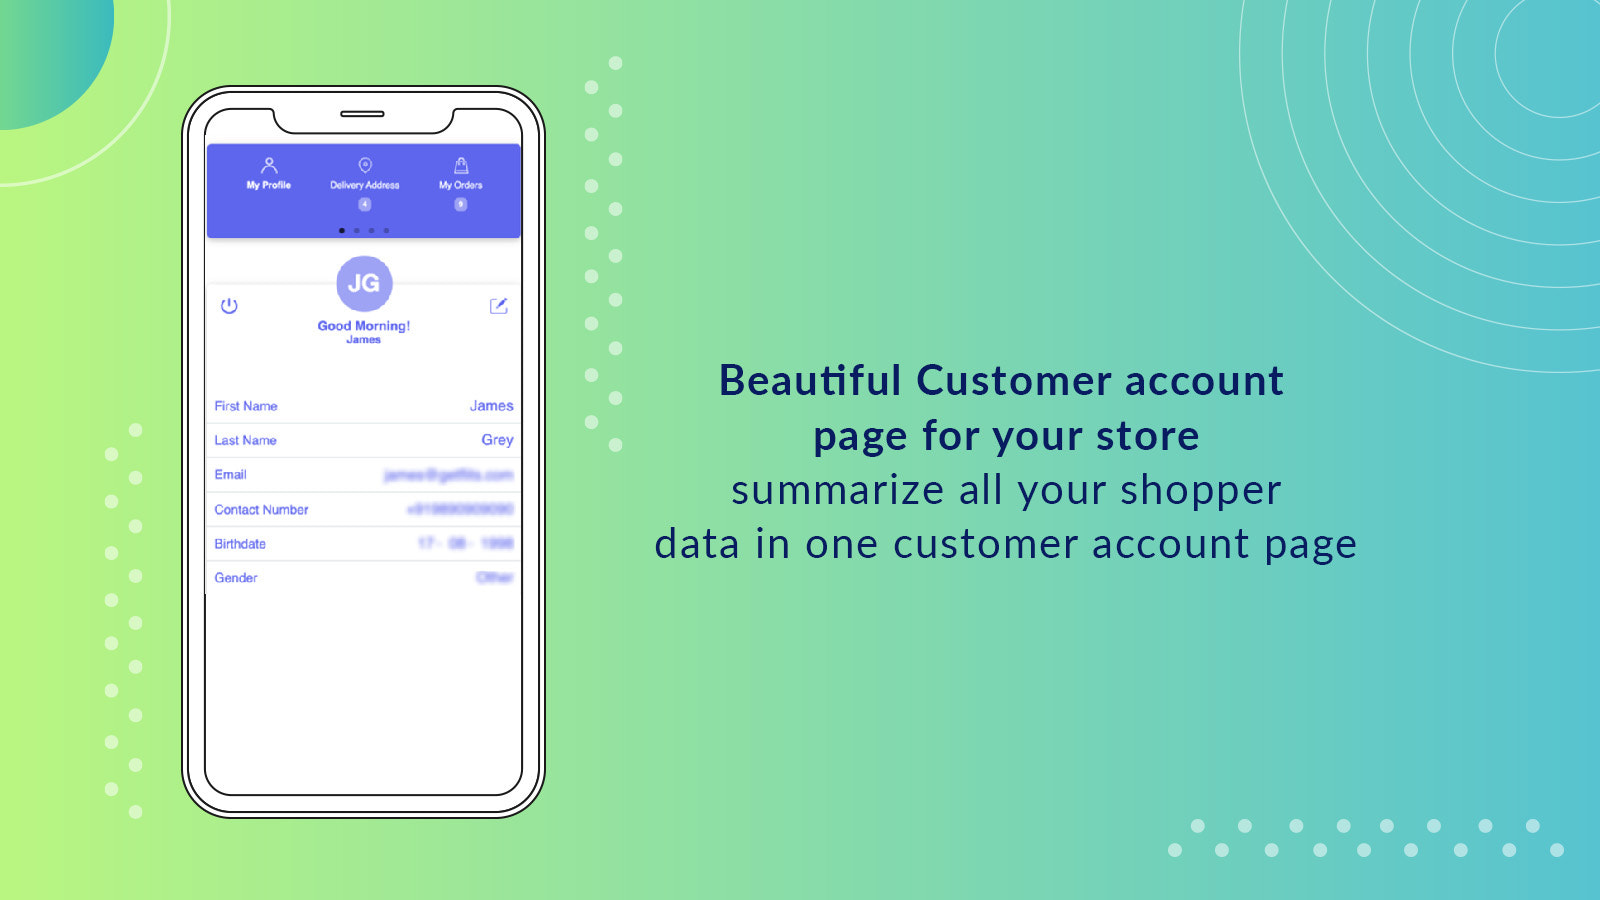 Let Shoppers access customer account page on mobile web too. 